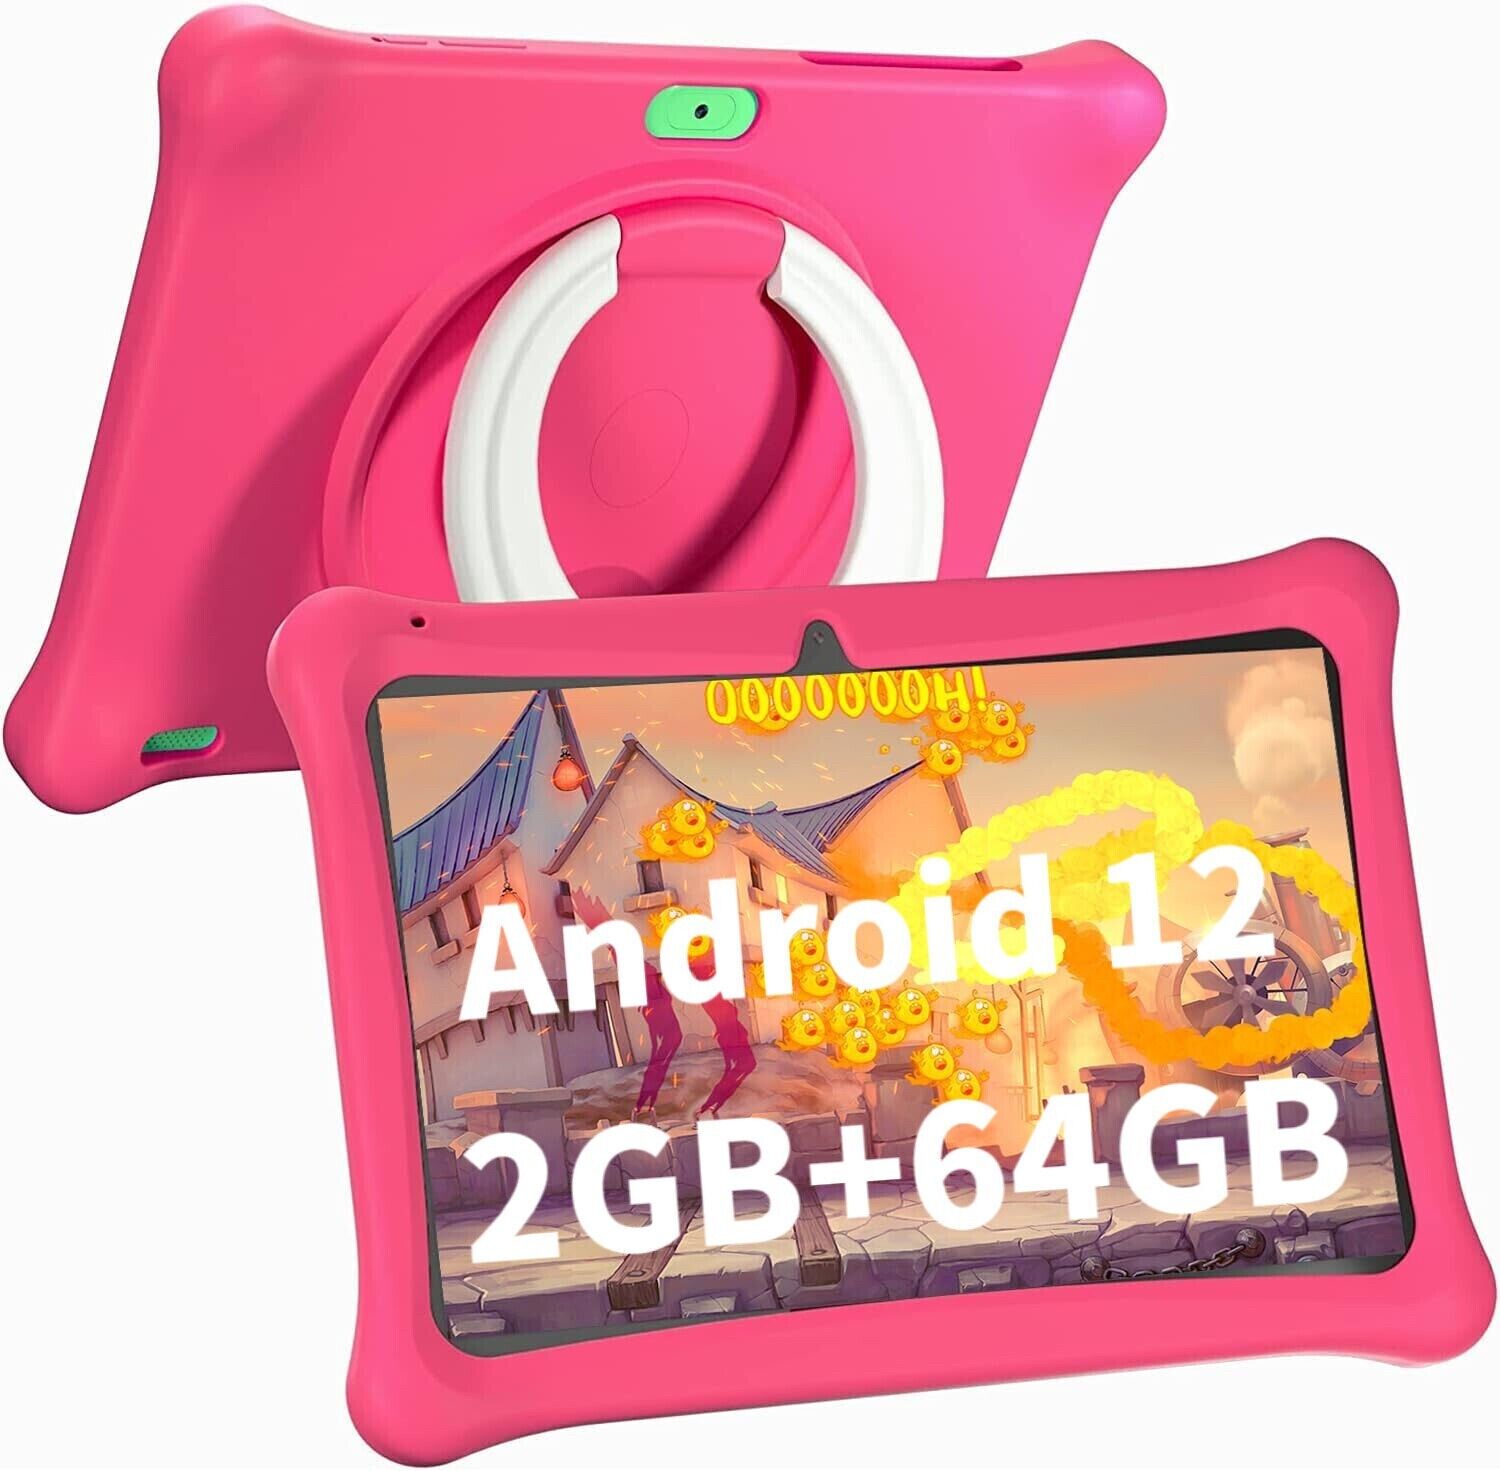 SGIN Kids Tablet 10.1 inch Android Tablet for Kids 64GB BT WiFi Parental Control